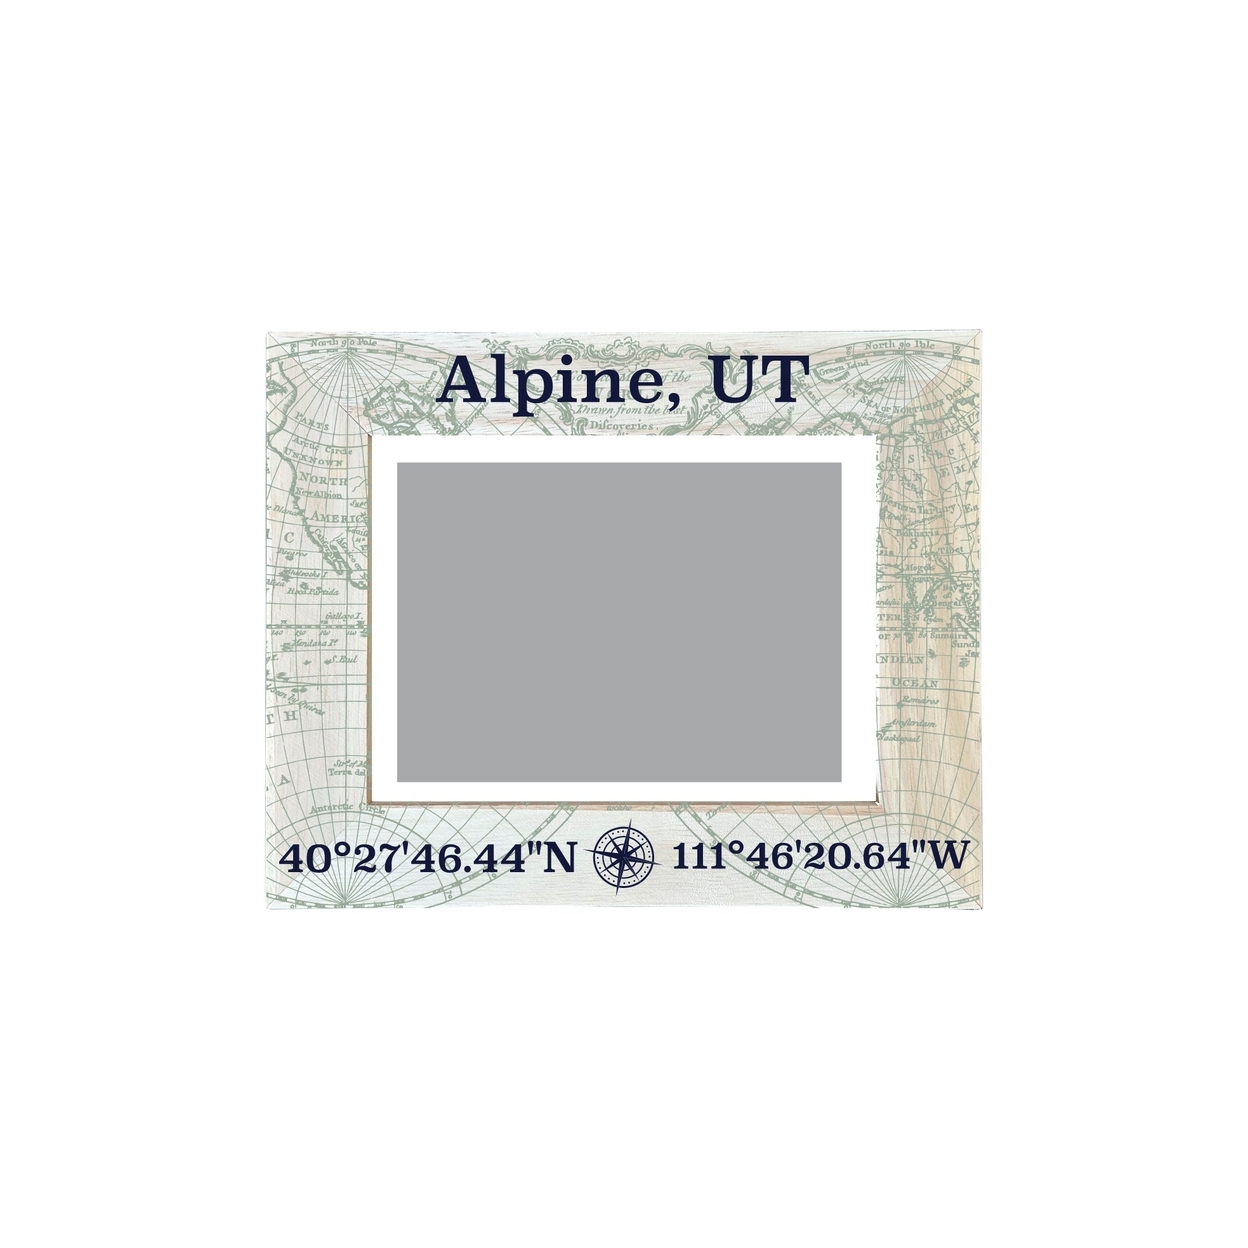 R and R Imports Alpine Utah Souvenir Wooden Photo Frame Compass Coordinates Design Matted to 4 x 6"